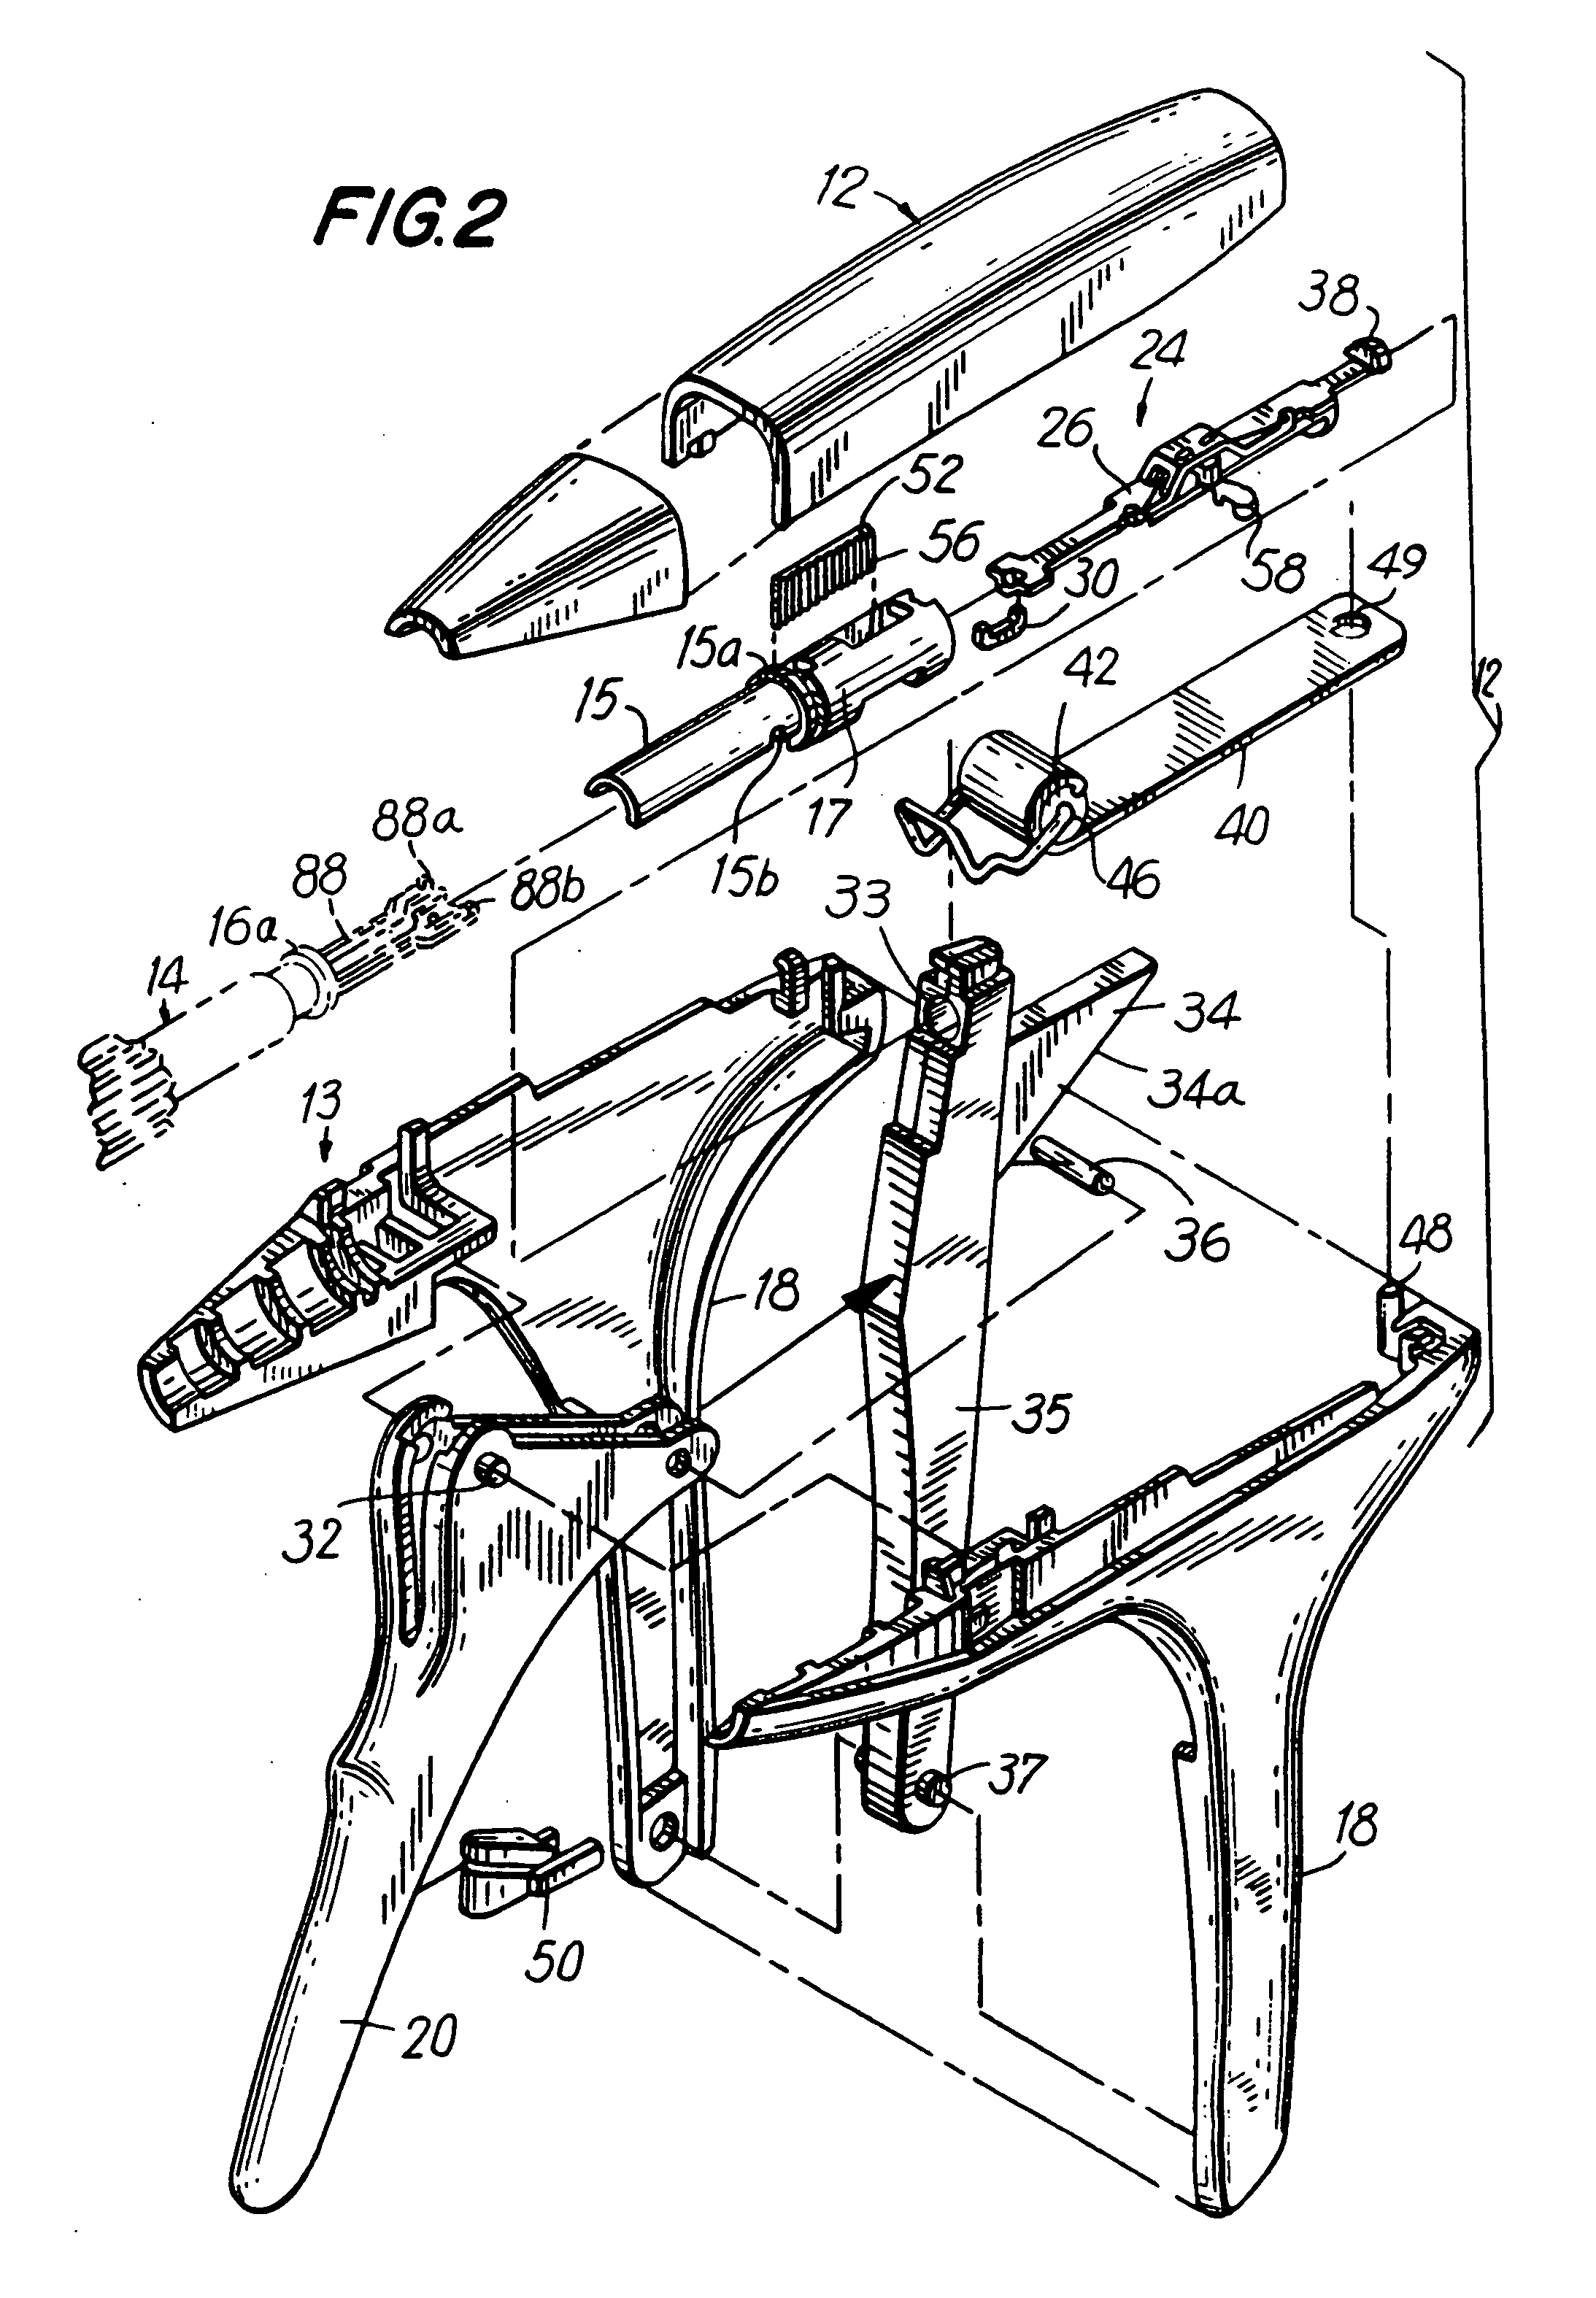 Apparatus for applying surgical fasteners to body tissue